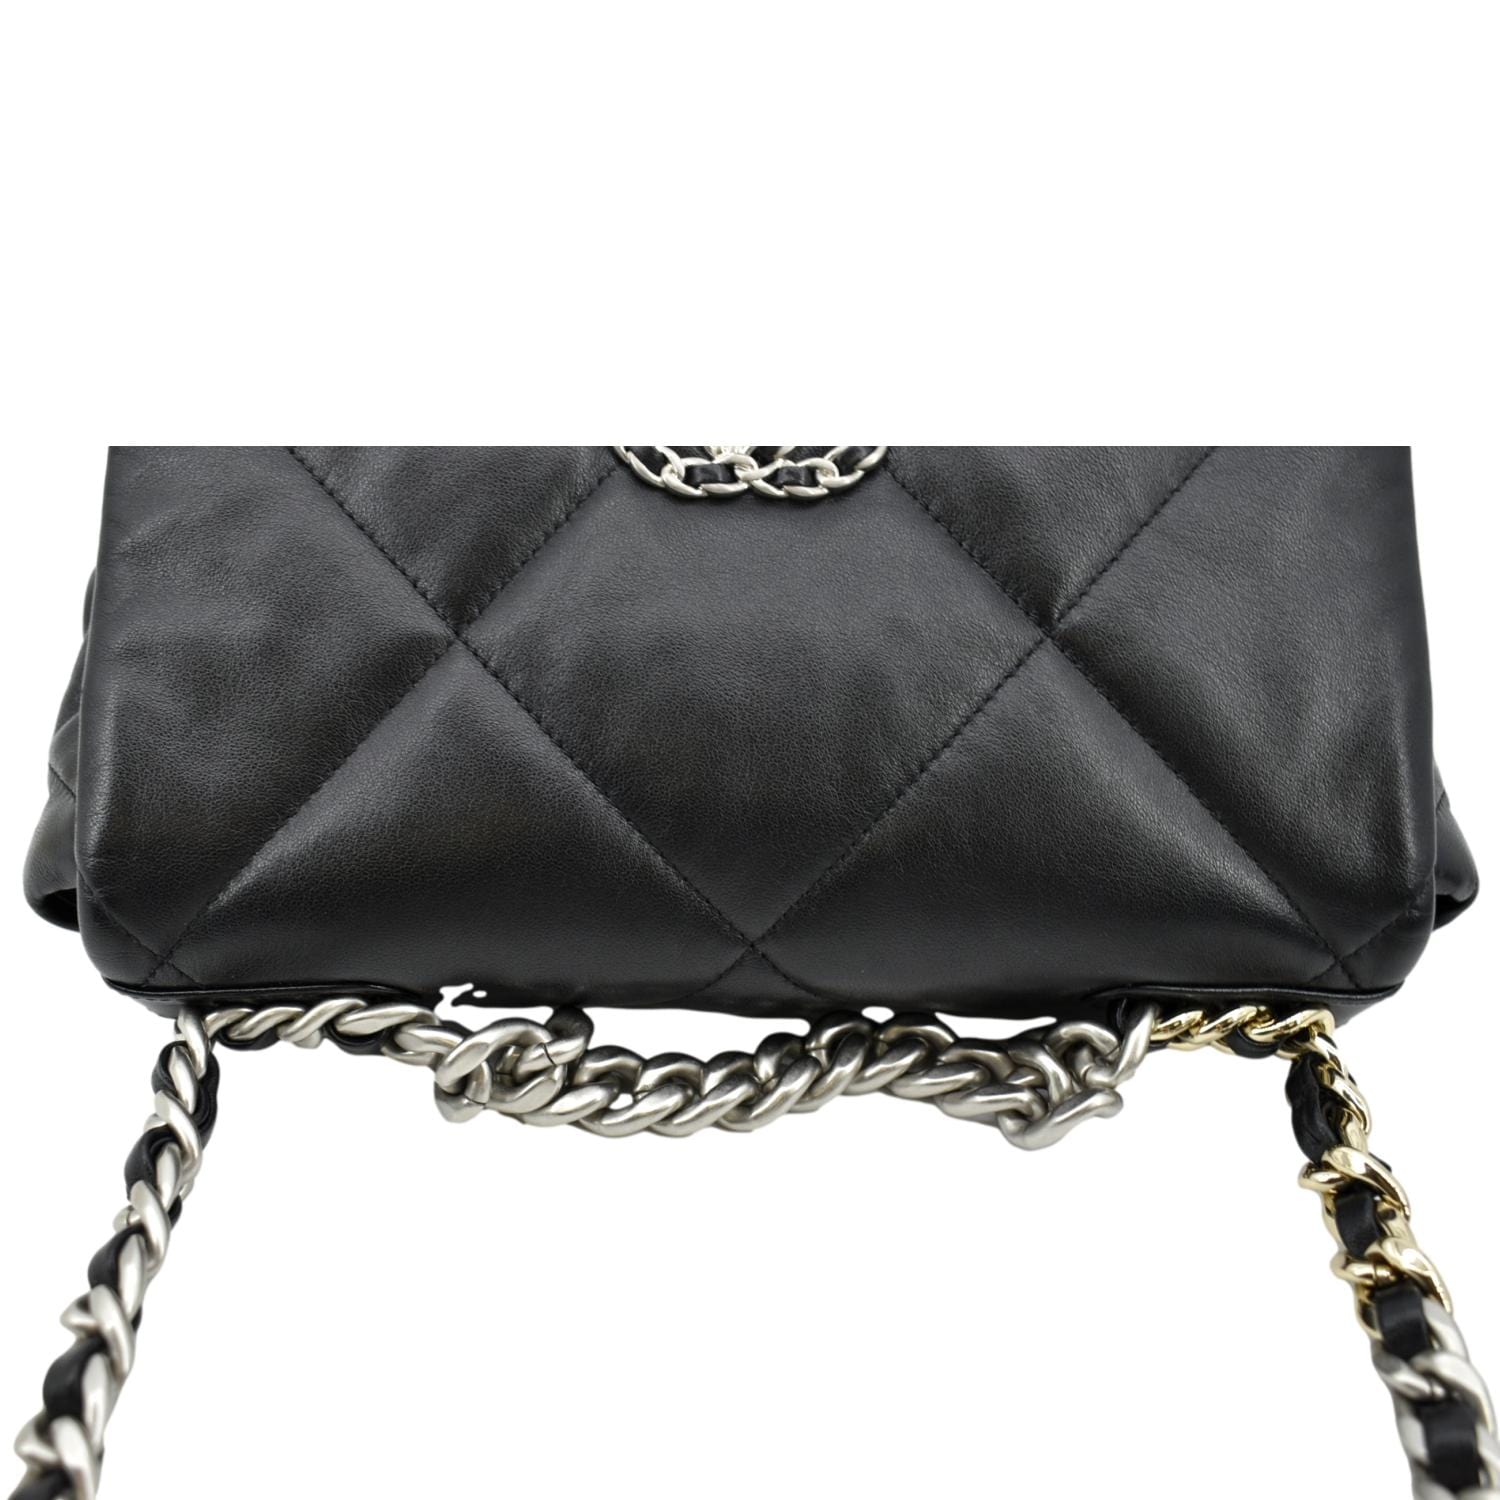 Chanel 19 Flap Bag Quilted Leather Medium Black 2339681